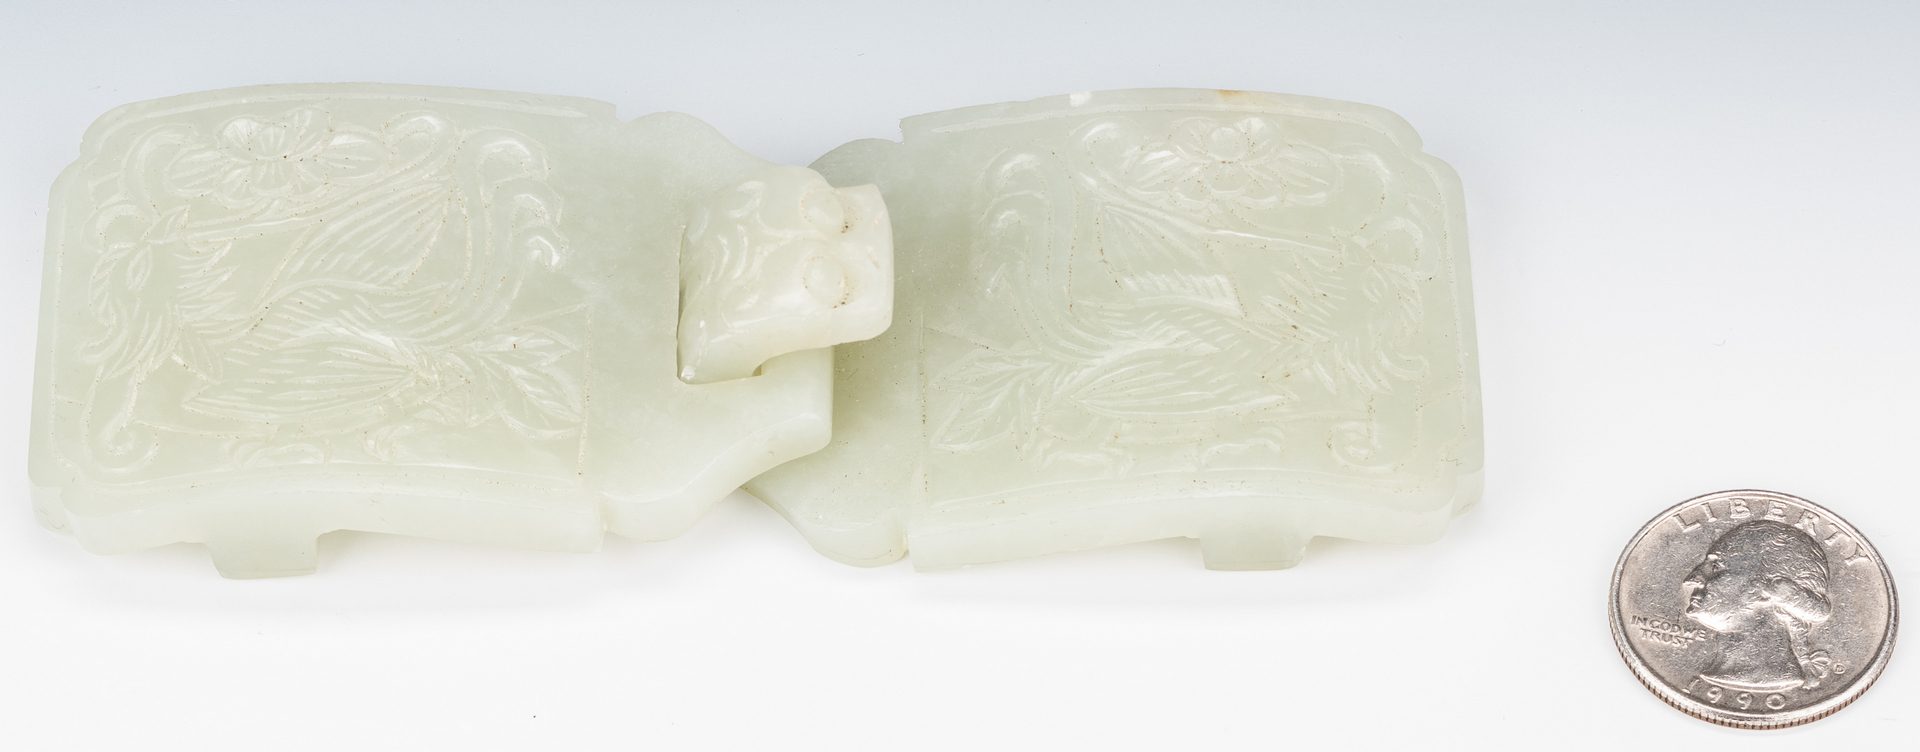 Lot 17: Chinese Carved Jade Double Belt Buckle